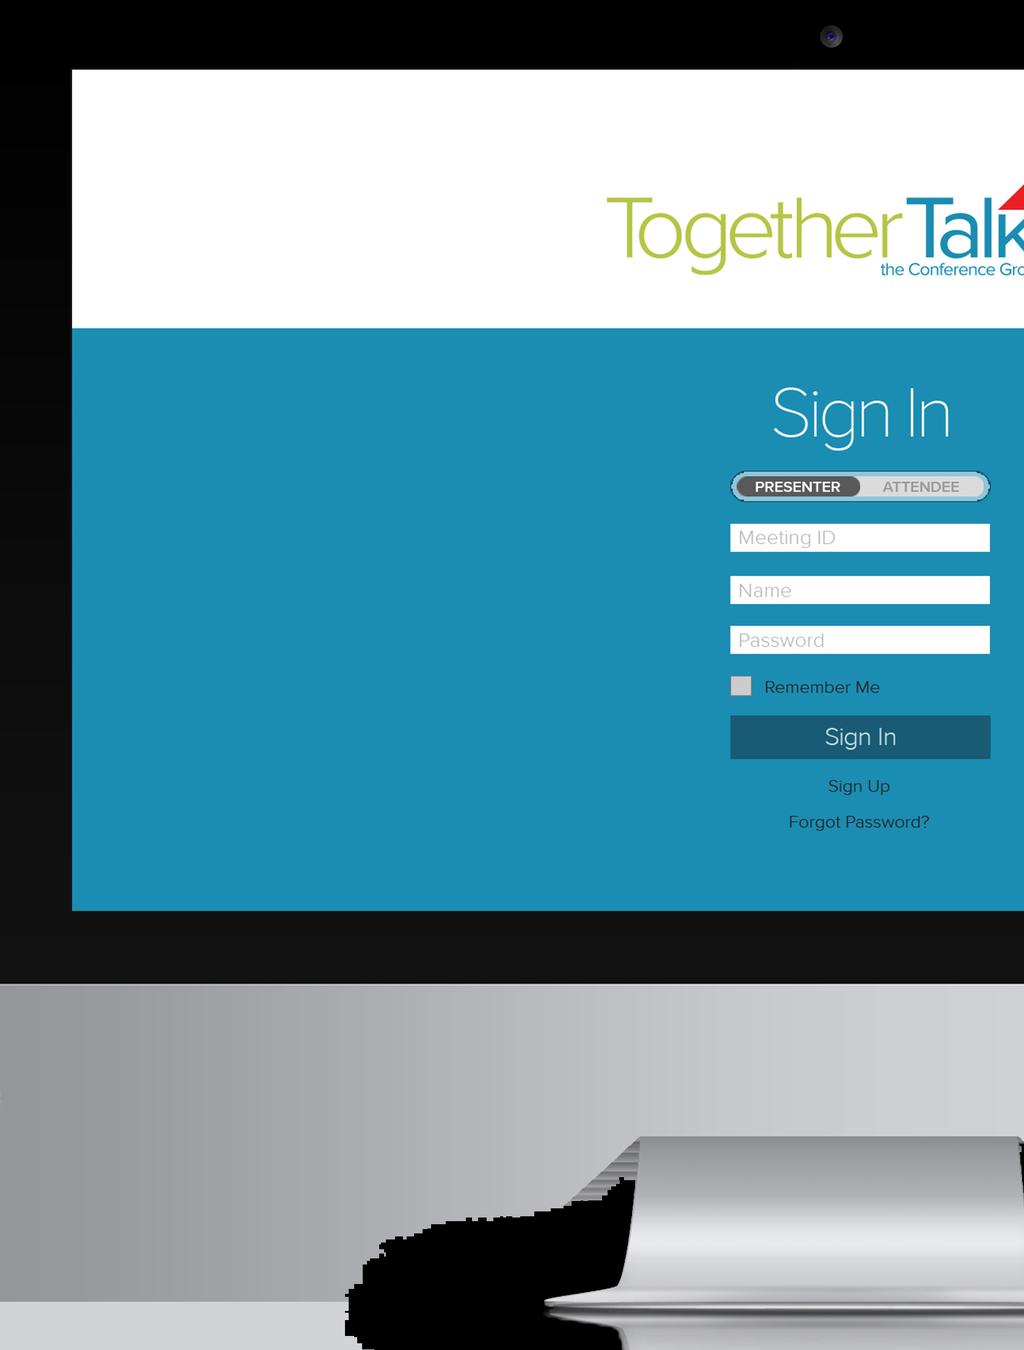 SIGN IN Go to video.togethertalk.com or click the Online Meeting Link from your invitation email and sign in via your web browser. To Download and install Together Talk onto your desktop go to video.